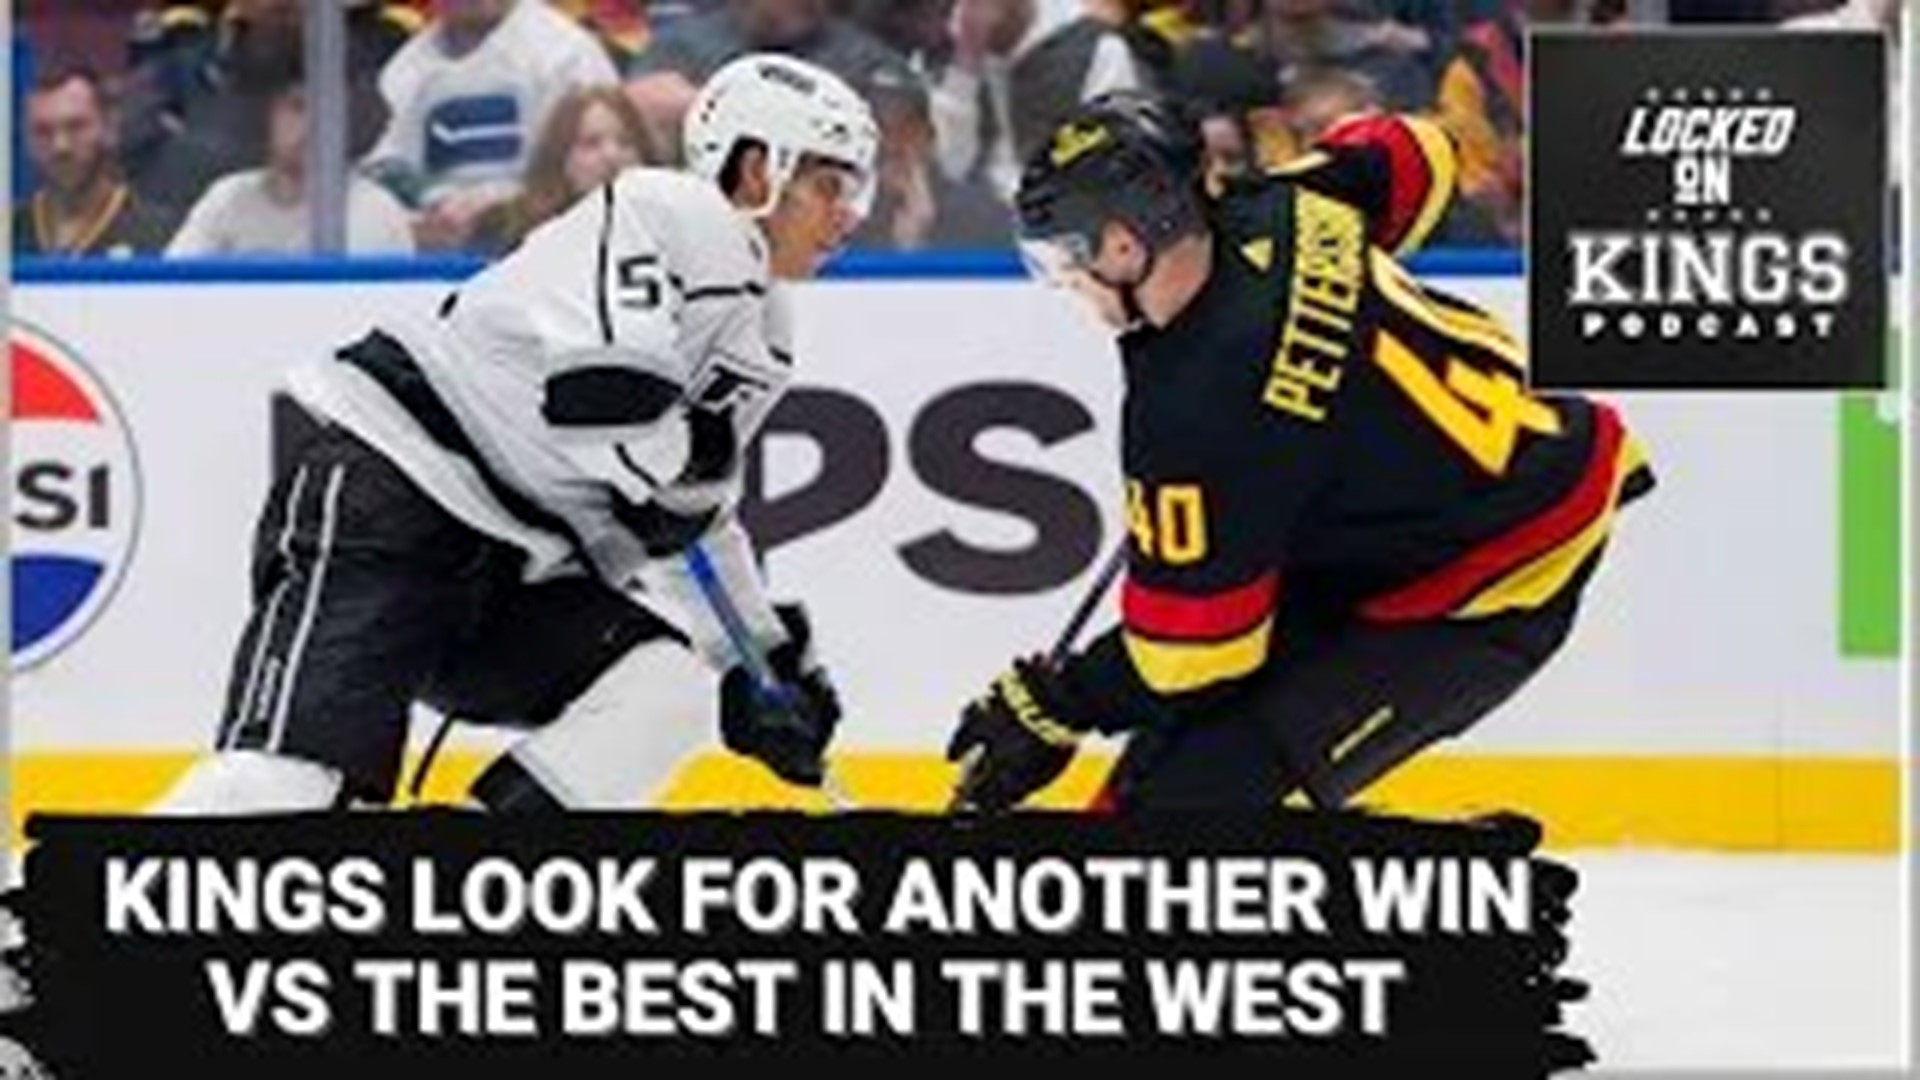 The Kings get ready for a rematch vs the Top team in the West as the Canucks are in town. That and the latest trade deadline rumors (Linus Ullmark?) on this LOK.